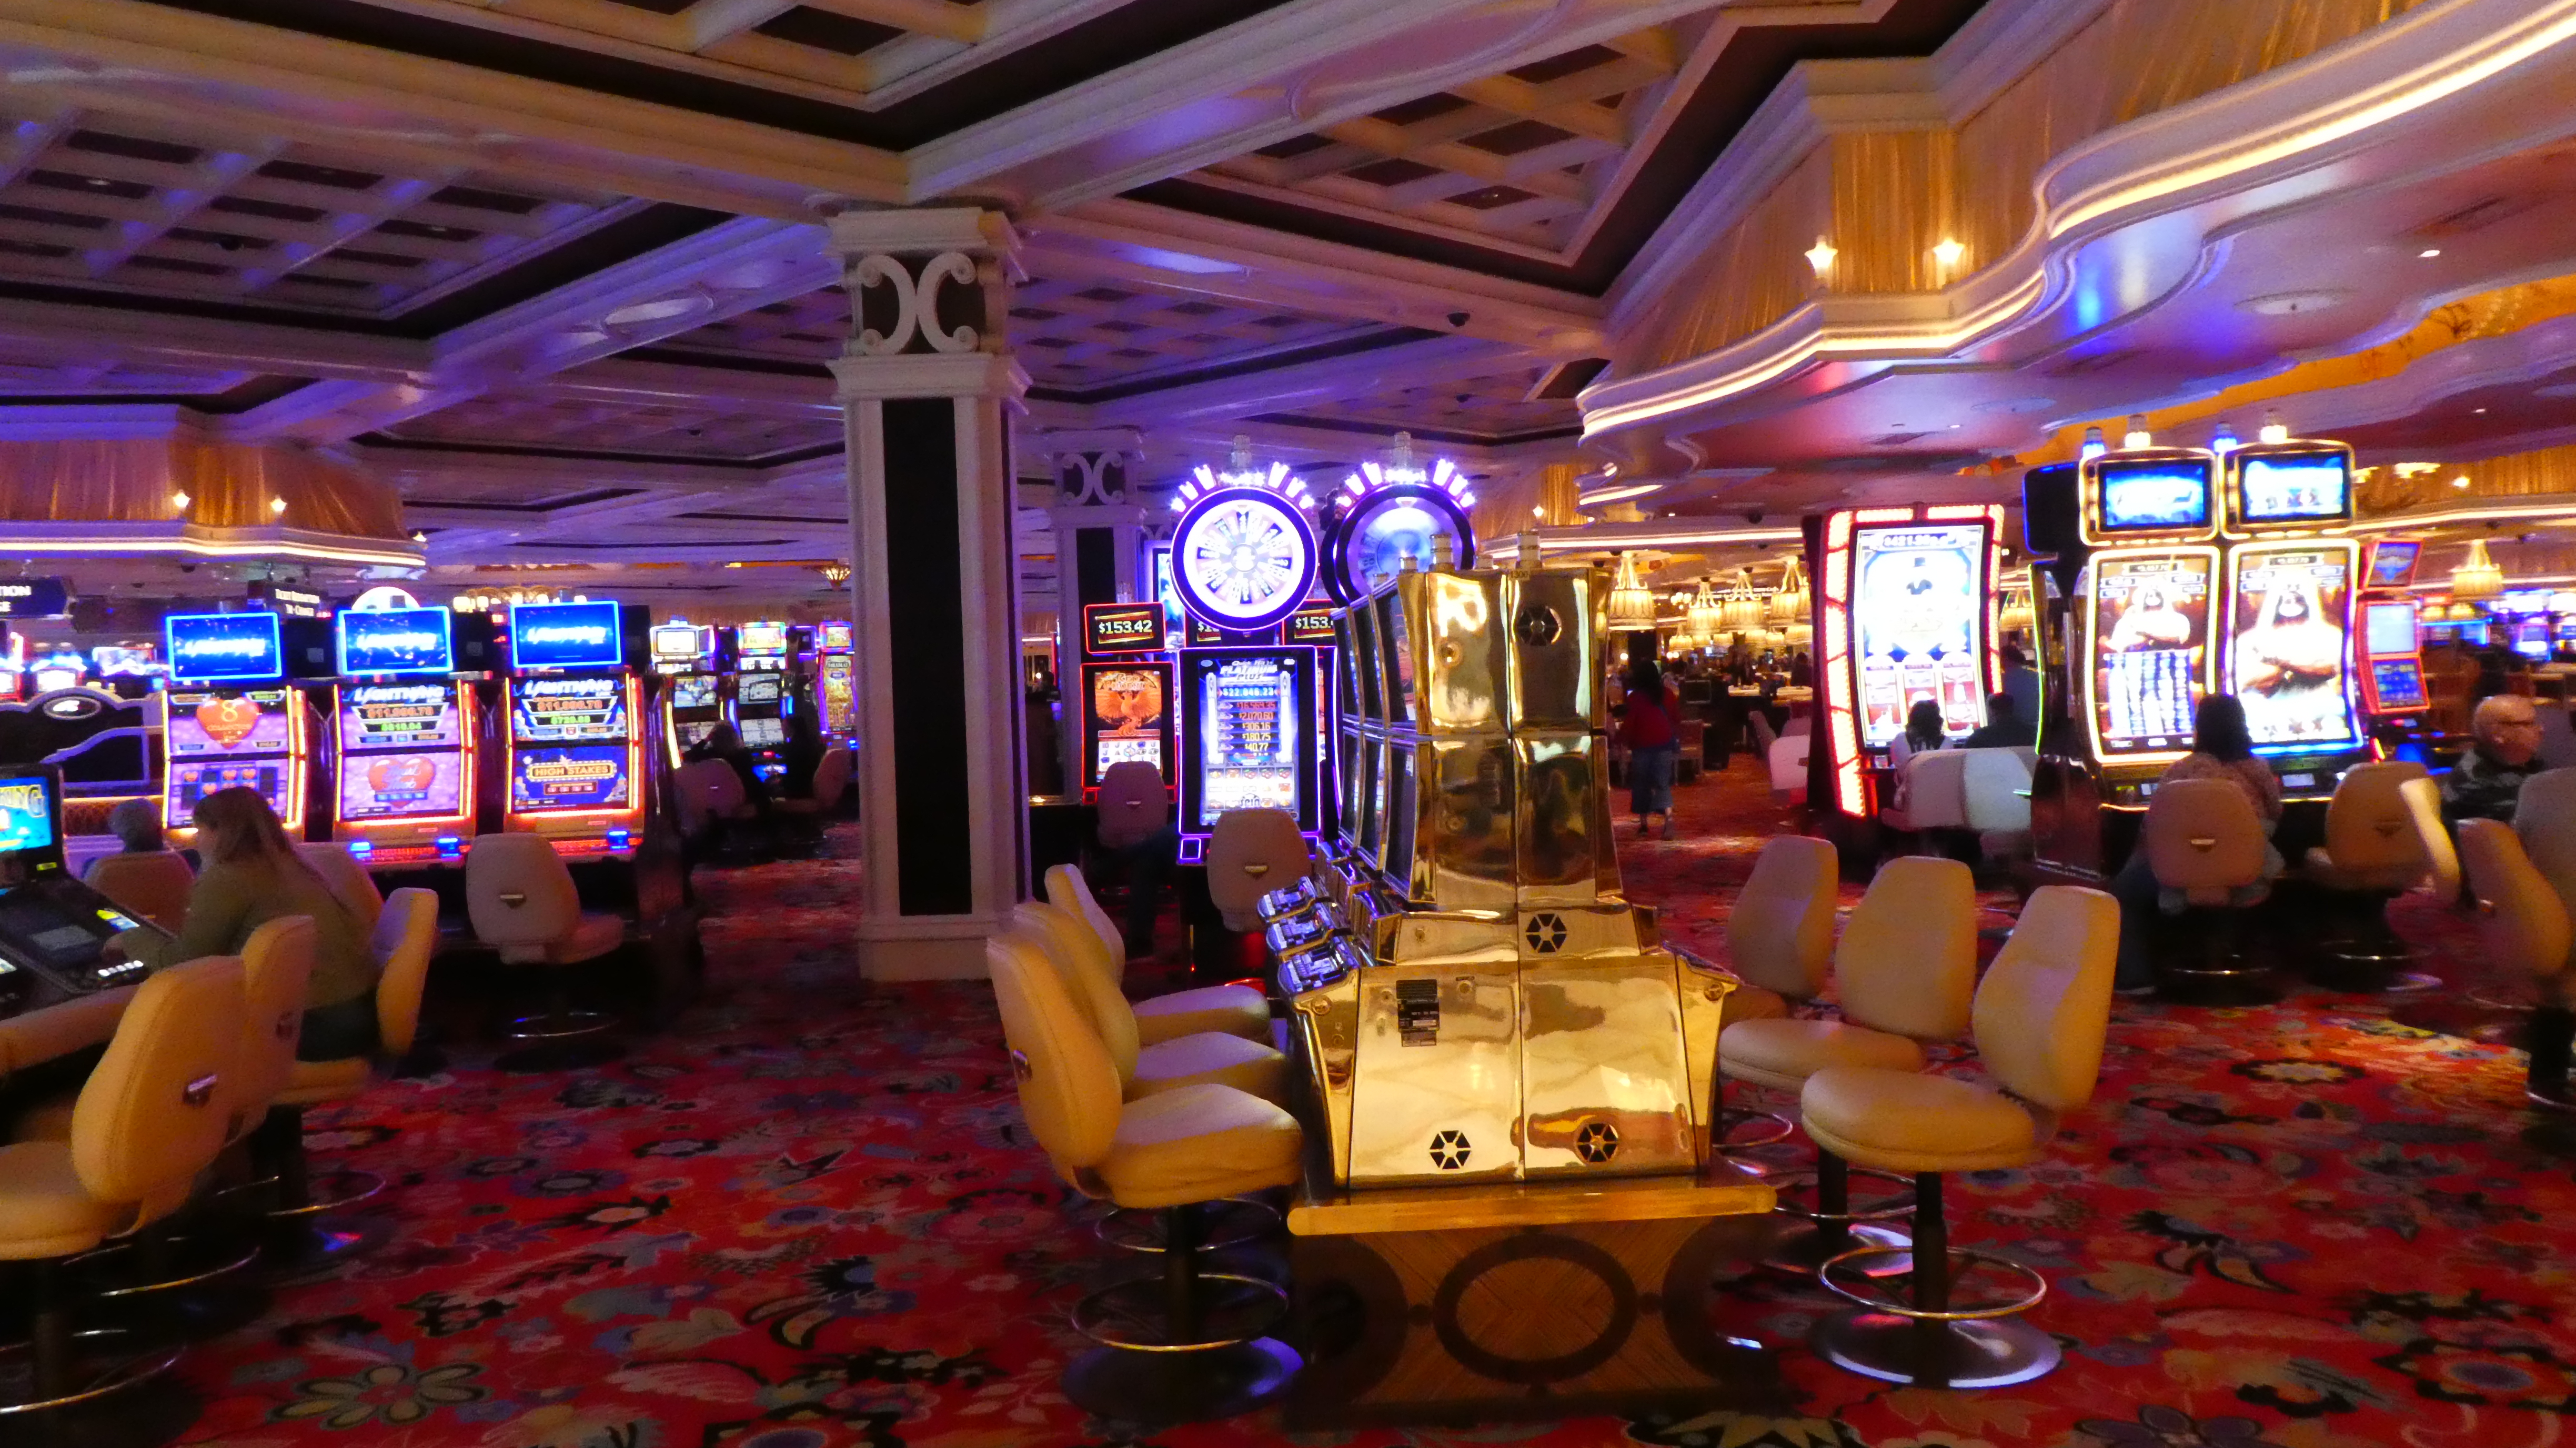 5. Recommendations for Making the Most of Evolving Casino Landscape